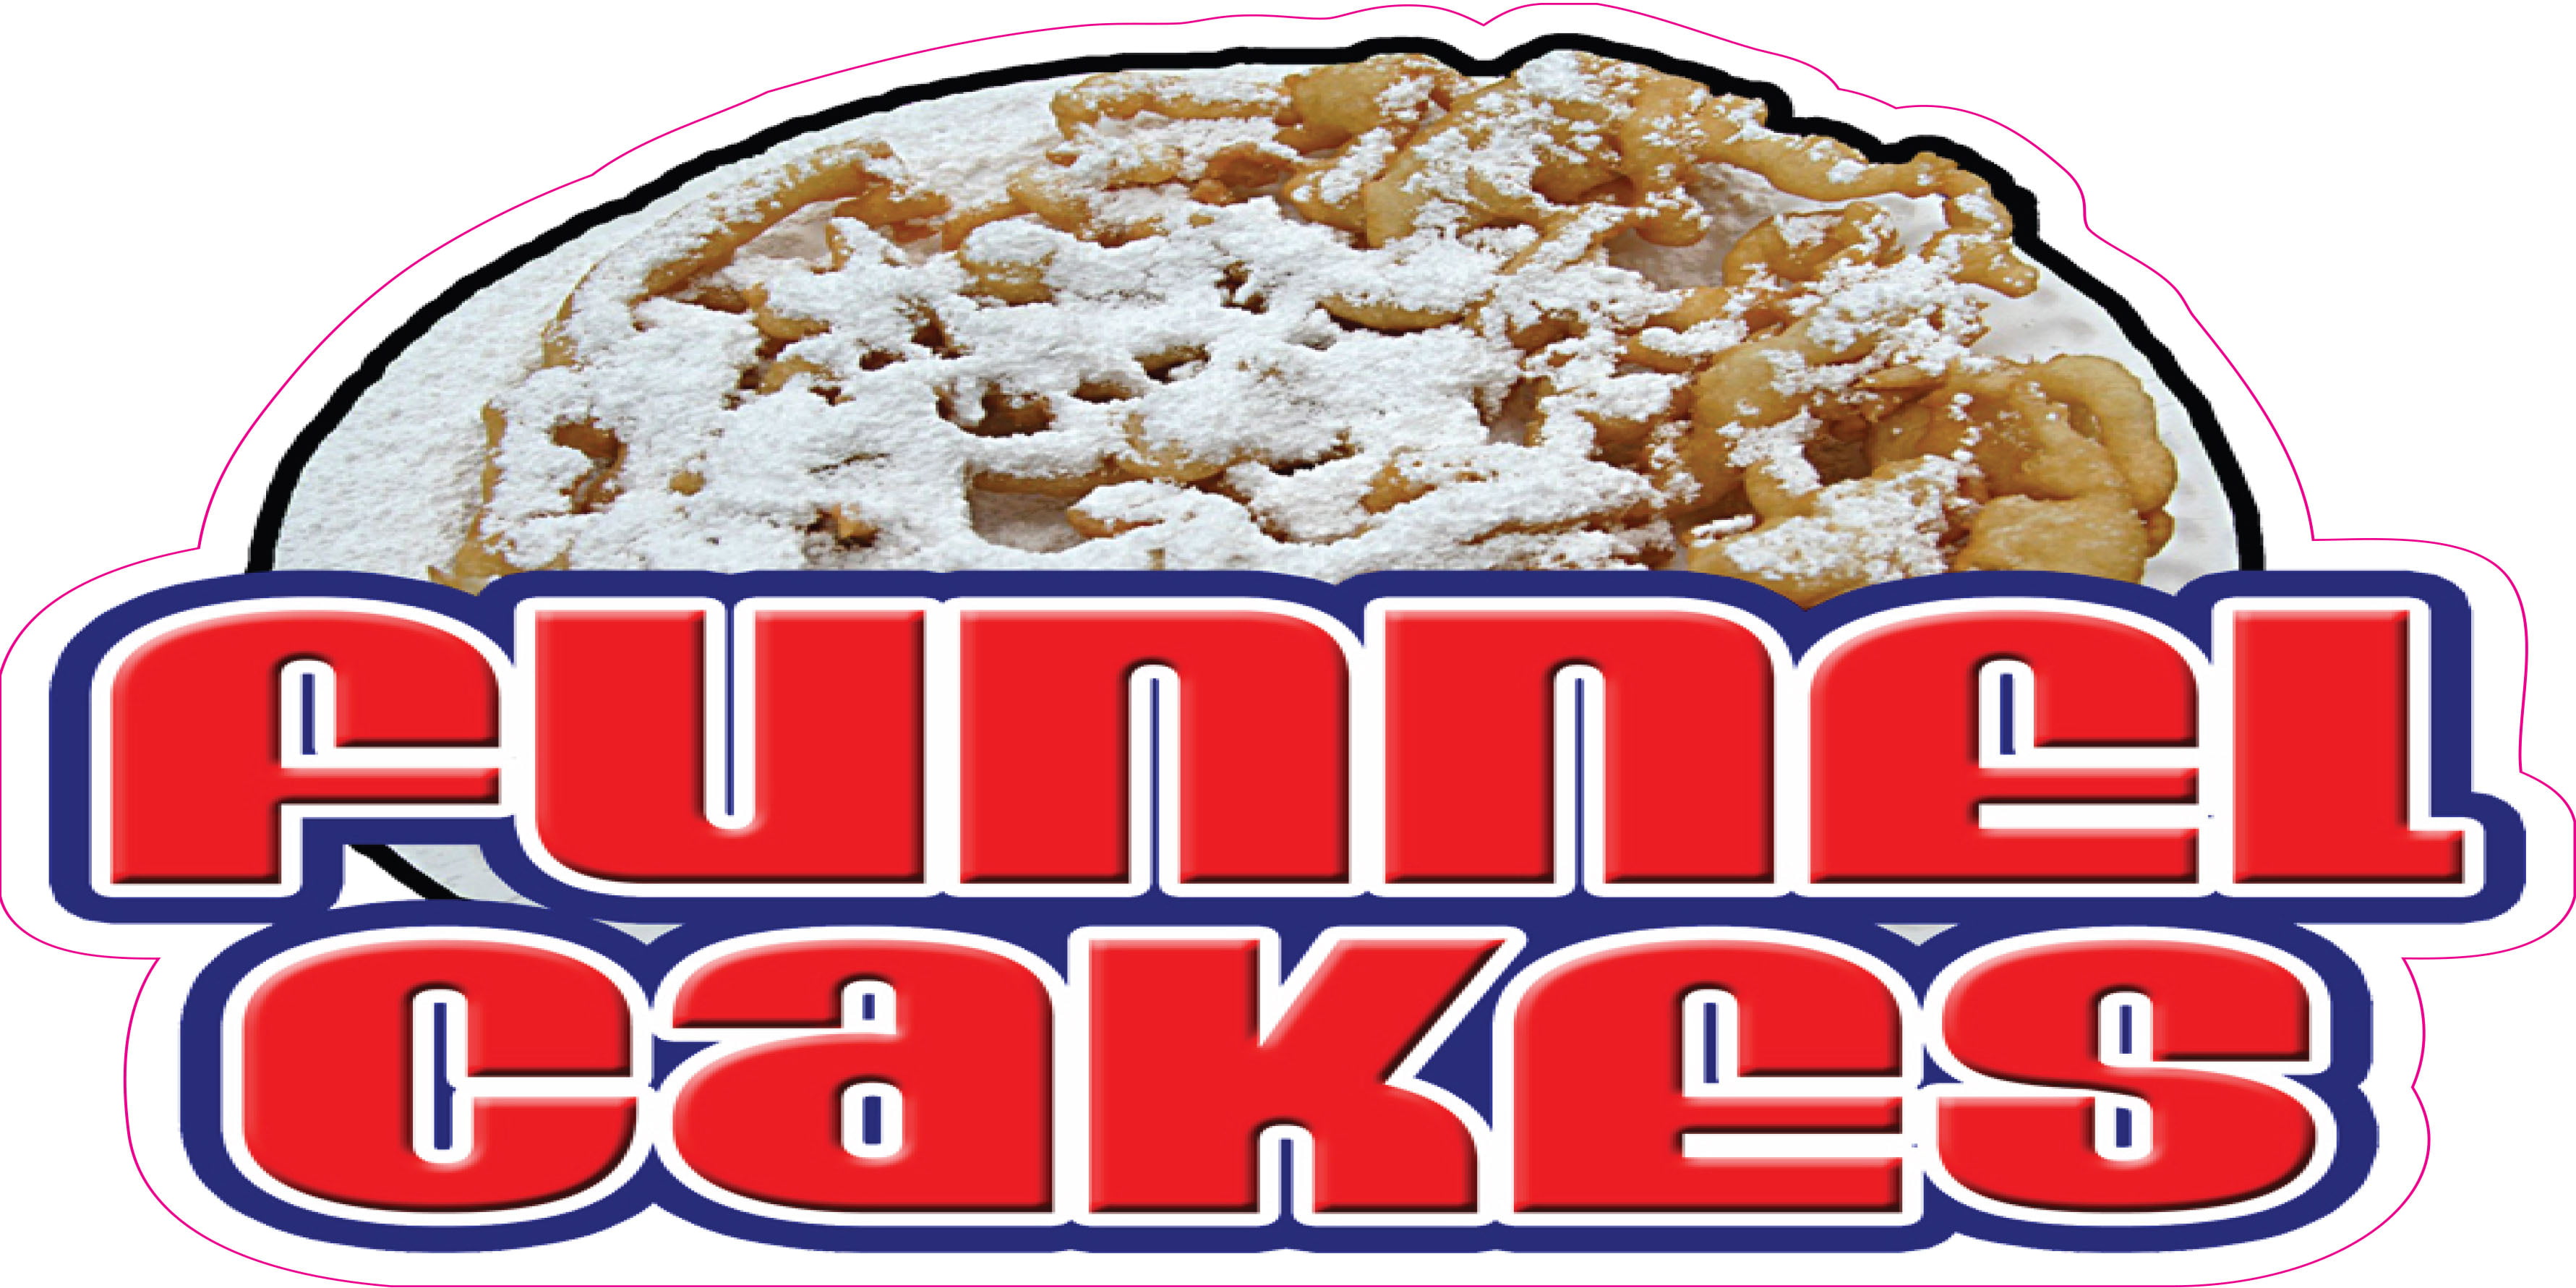 Funnel Cakes DECAL Choose Your Size Food Truck Concession Vinyl Sticker 